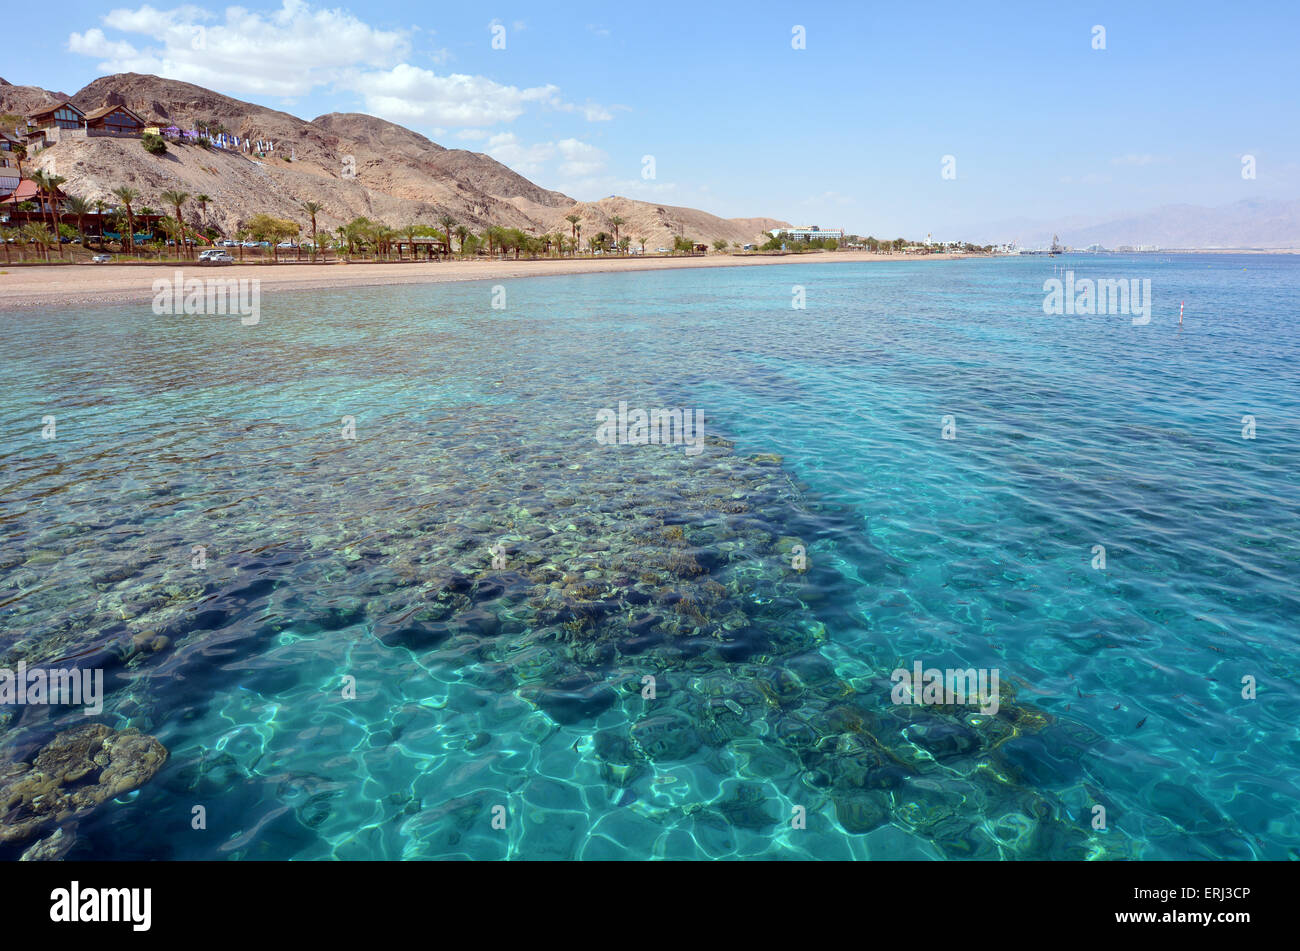 EILAT, ISR - APRIL 14 2015:Seascape Coral Beach Nature Reserve in Eilat, Israel.It's one of the most beautiful coral reef in the world and is visited by travellers from all